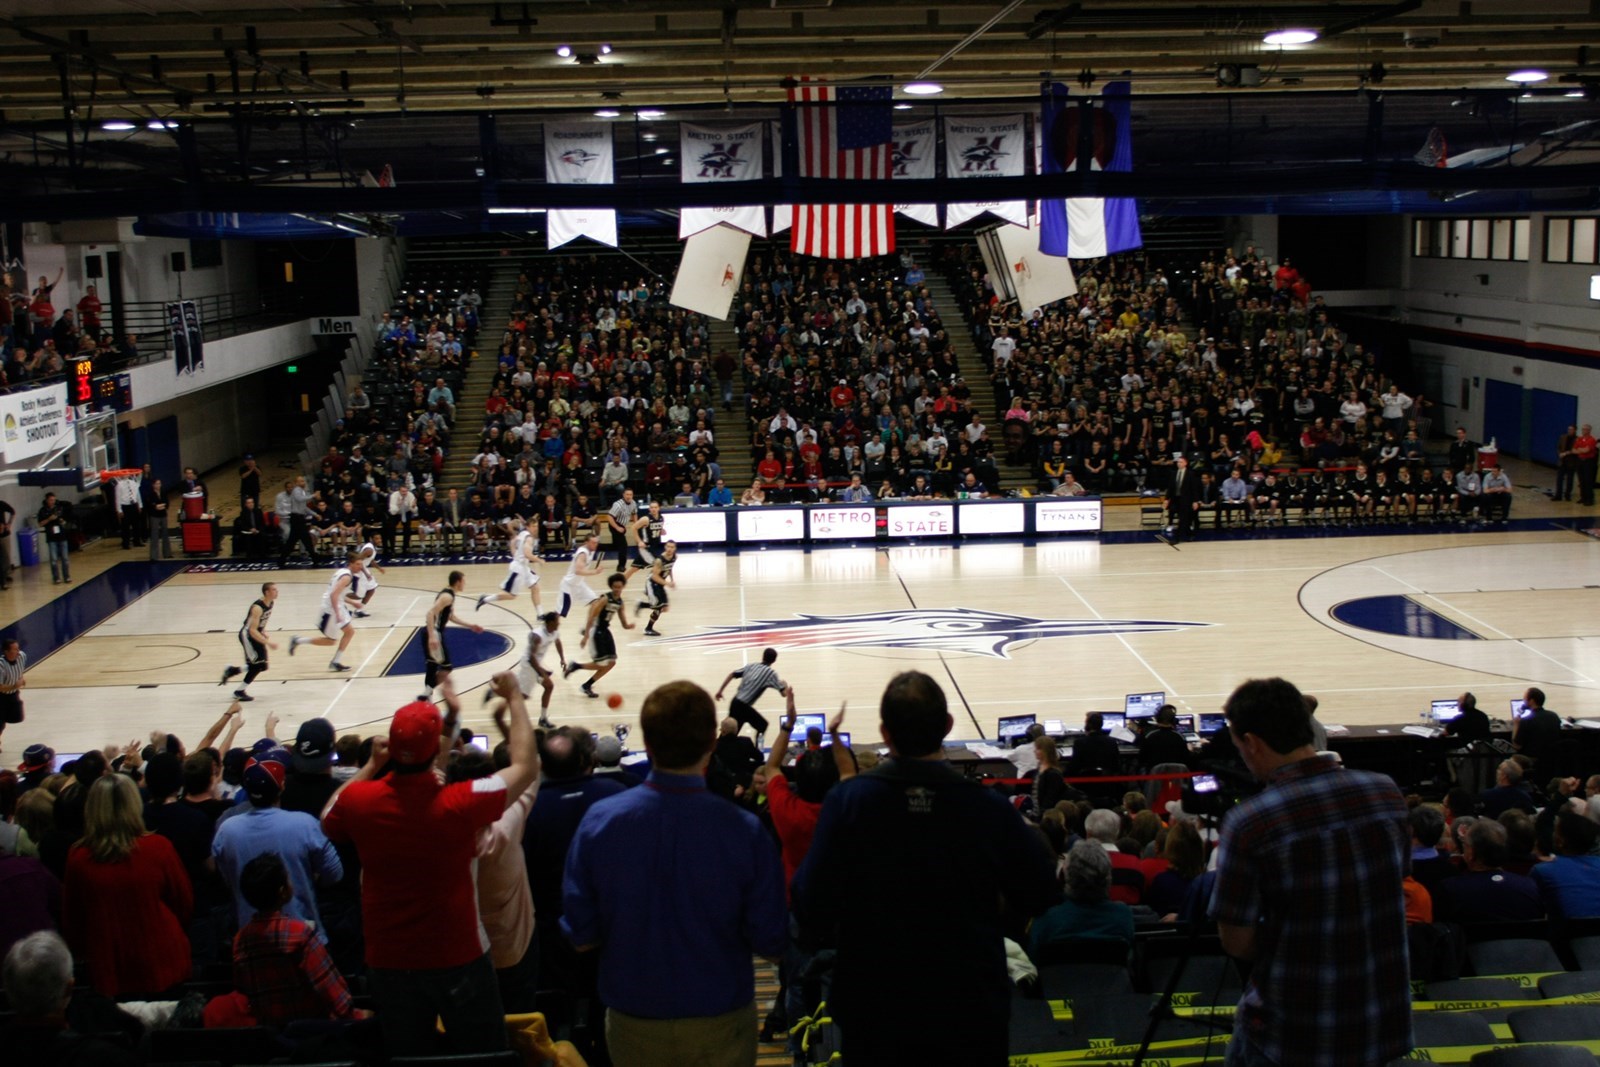 Auraria Event Center with full crowd during a men's basketball game